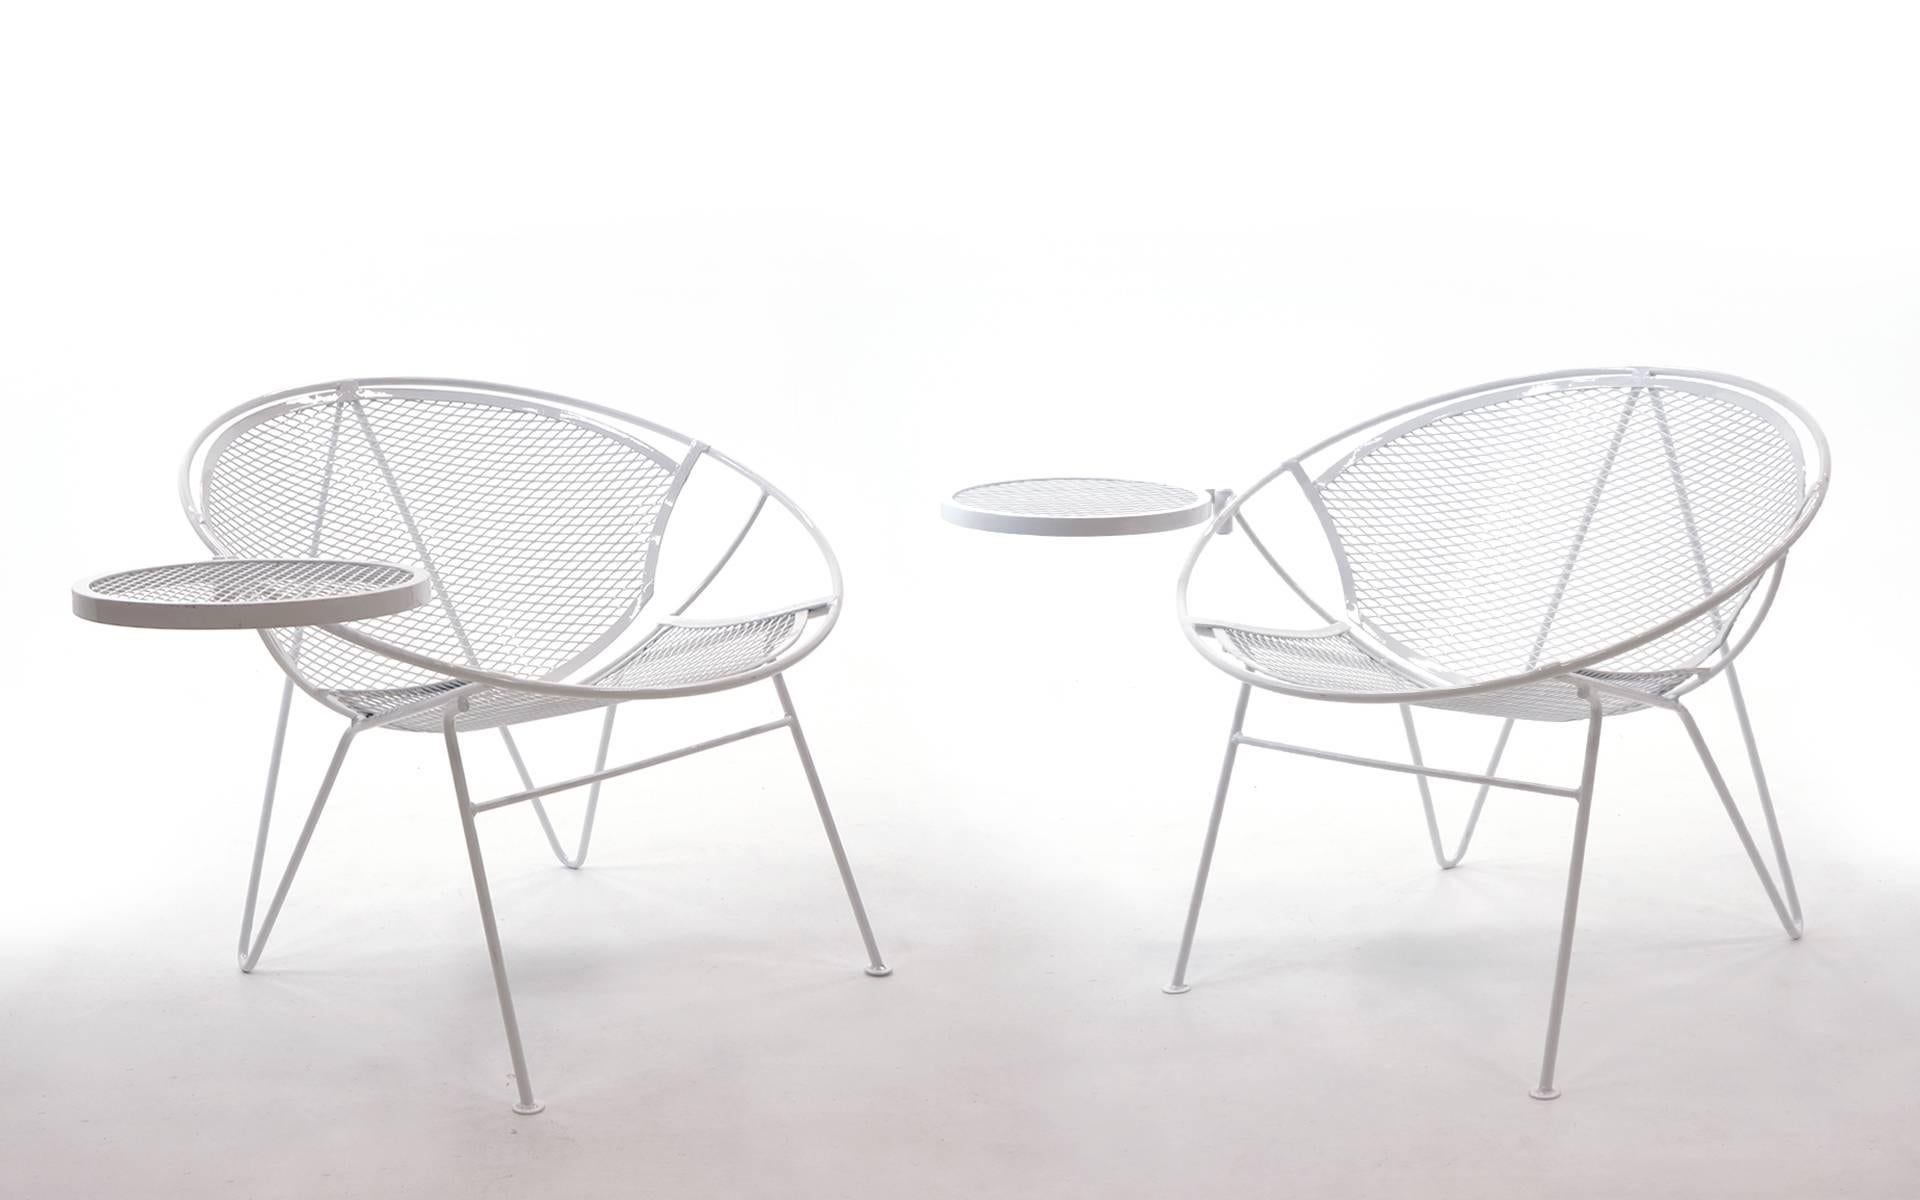 Two sets available. Price is per set. A set consists of a chair, detachable footrest, and side table. This design is the best combination of style and comfort in outdoor seating. Very rare hairpin leg version of the the Maurizio Tempistini design